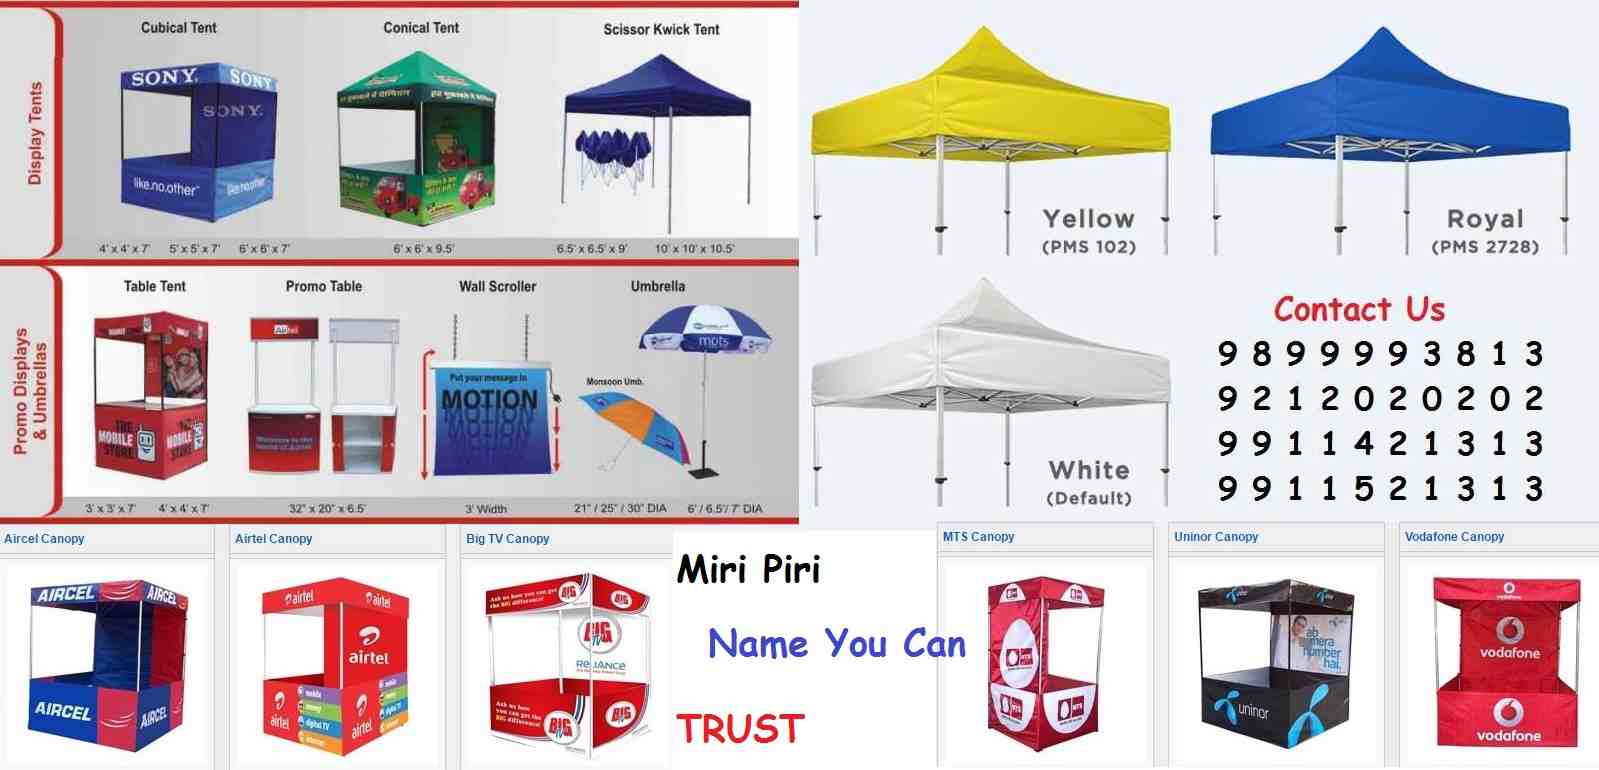 Demo Tents Unique Latest Modular Designs, Low Price, Best Quality, Fast Delivery All Over World